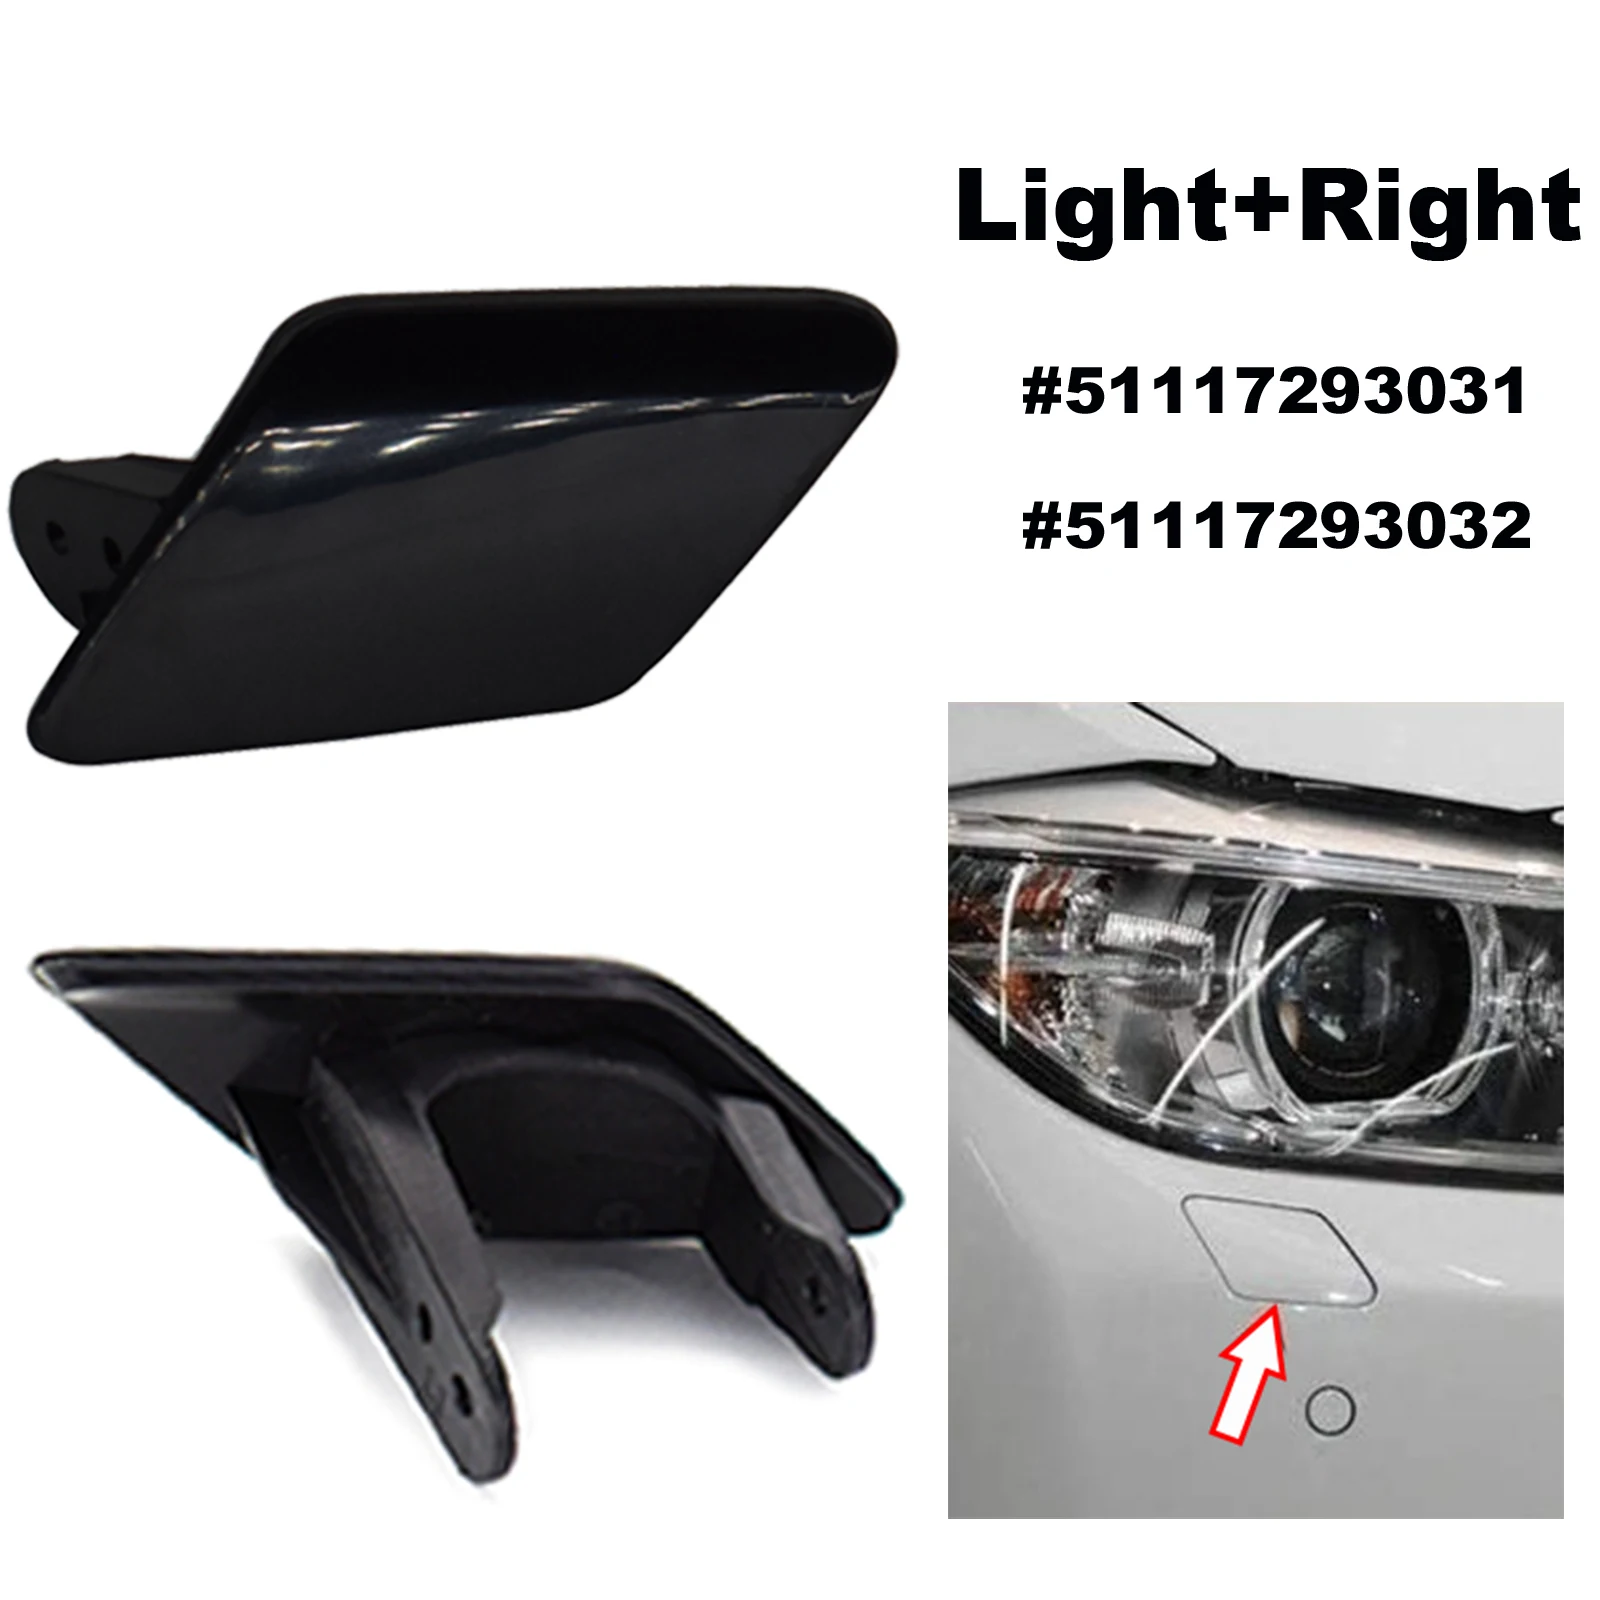 Details about   Right Headlight Washer Spray Nozzle Cover Fit for BMW F30 F31 3 Series 12-15 Wh